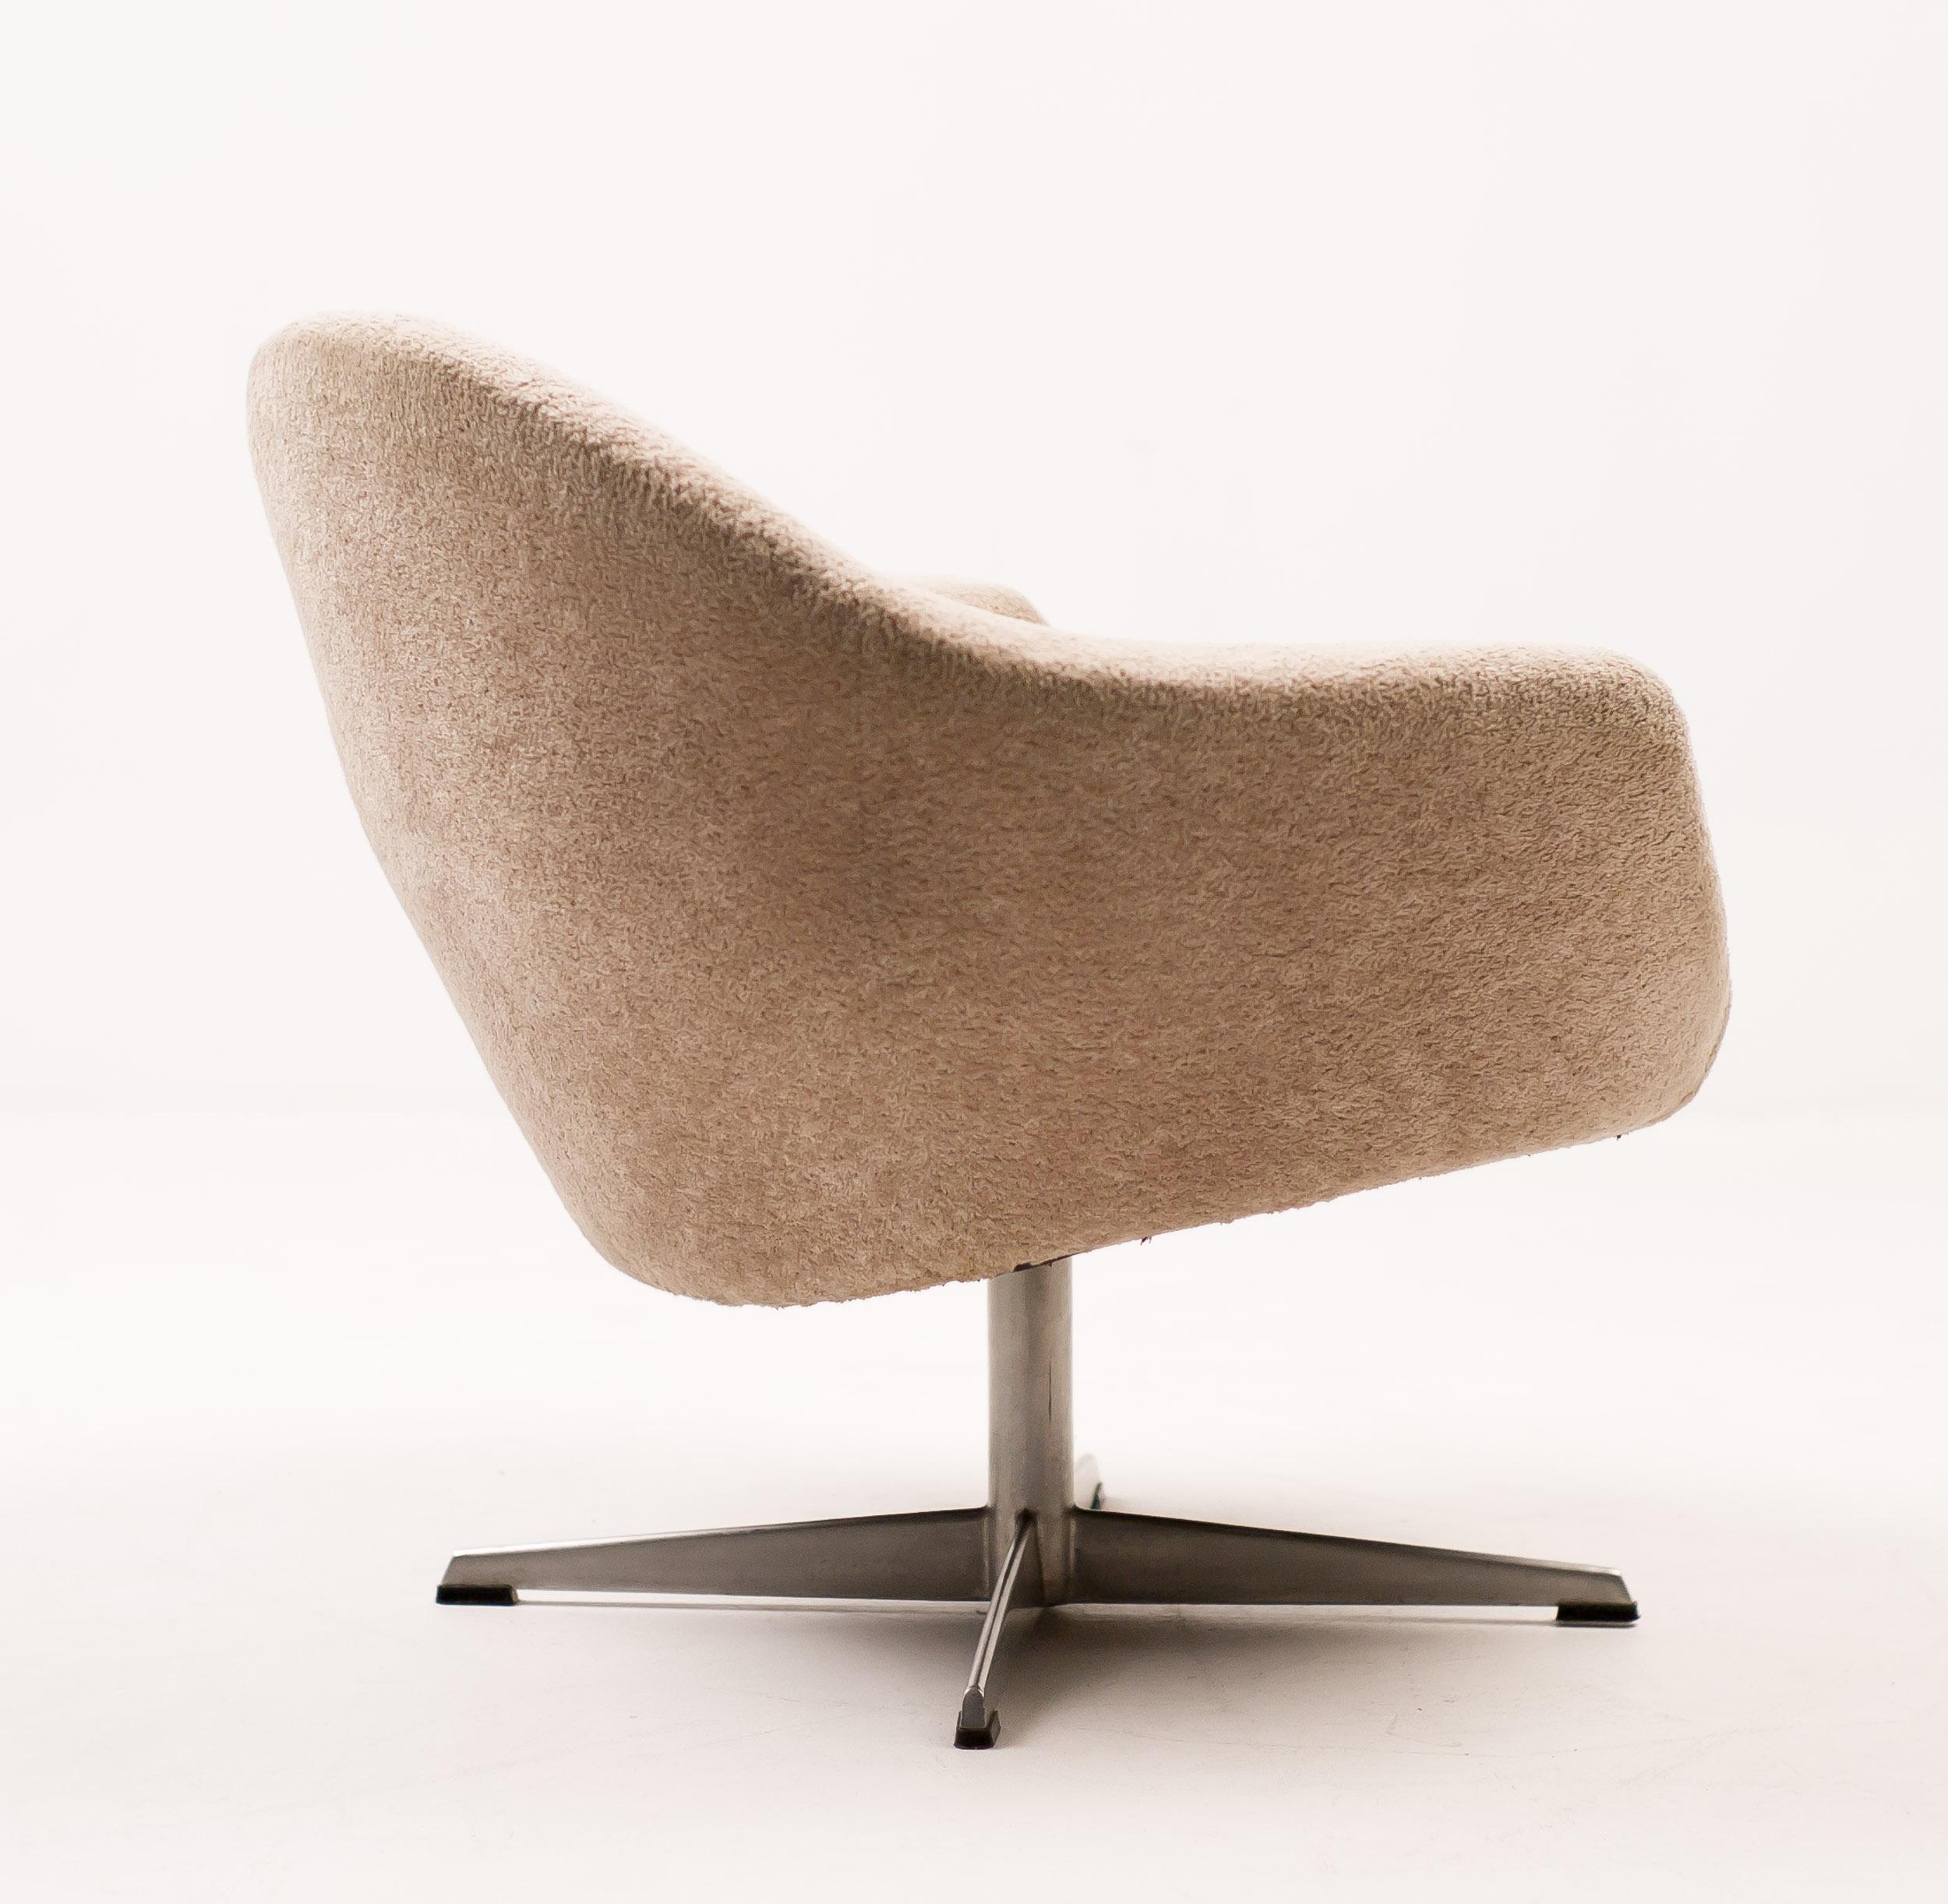 Very comfortable Scandinavian lounge chair upholstered in teddy fabric on a cast aluminium swivel base.
Unlike i.e. a swan or egg chair it is virtually impossible to find another example of this chair. Very exclusive!
Great all original vintage